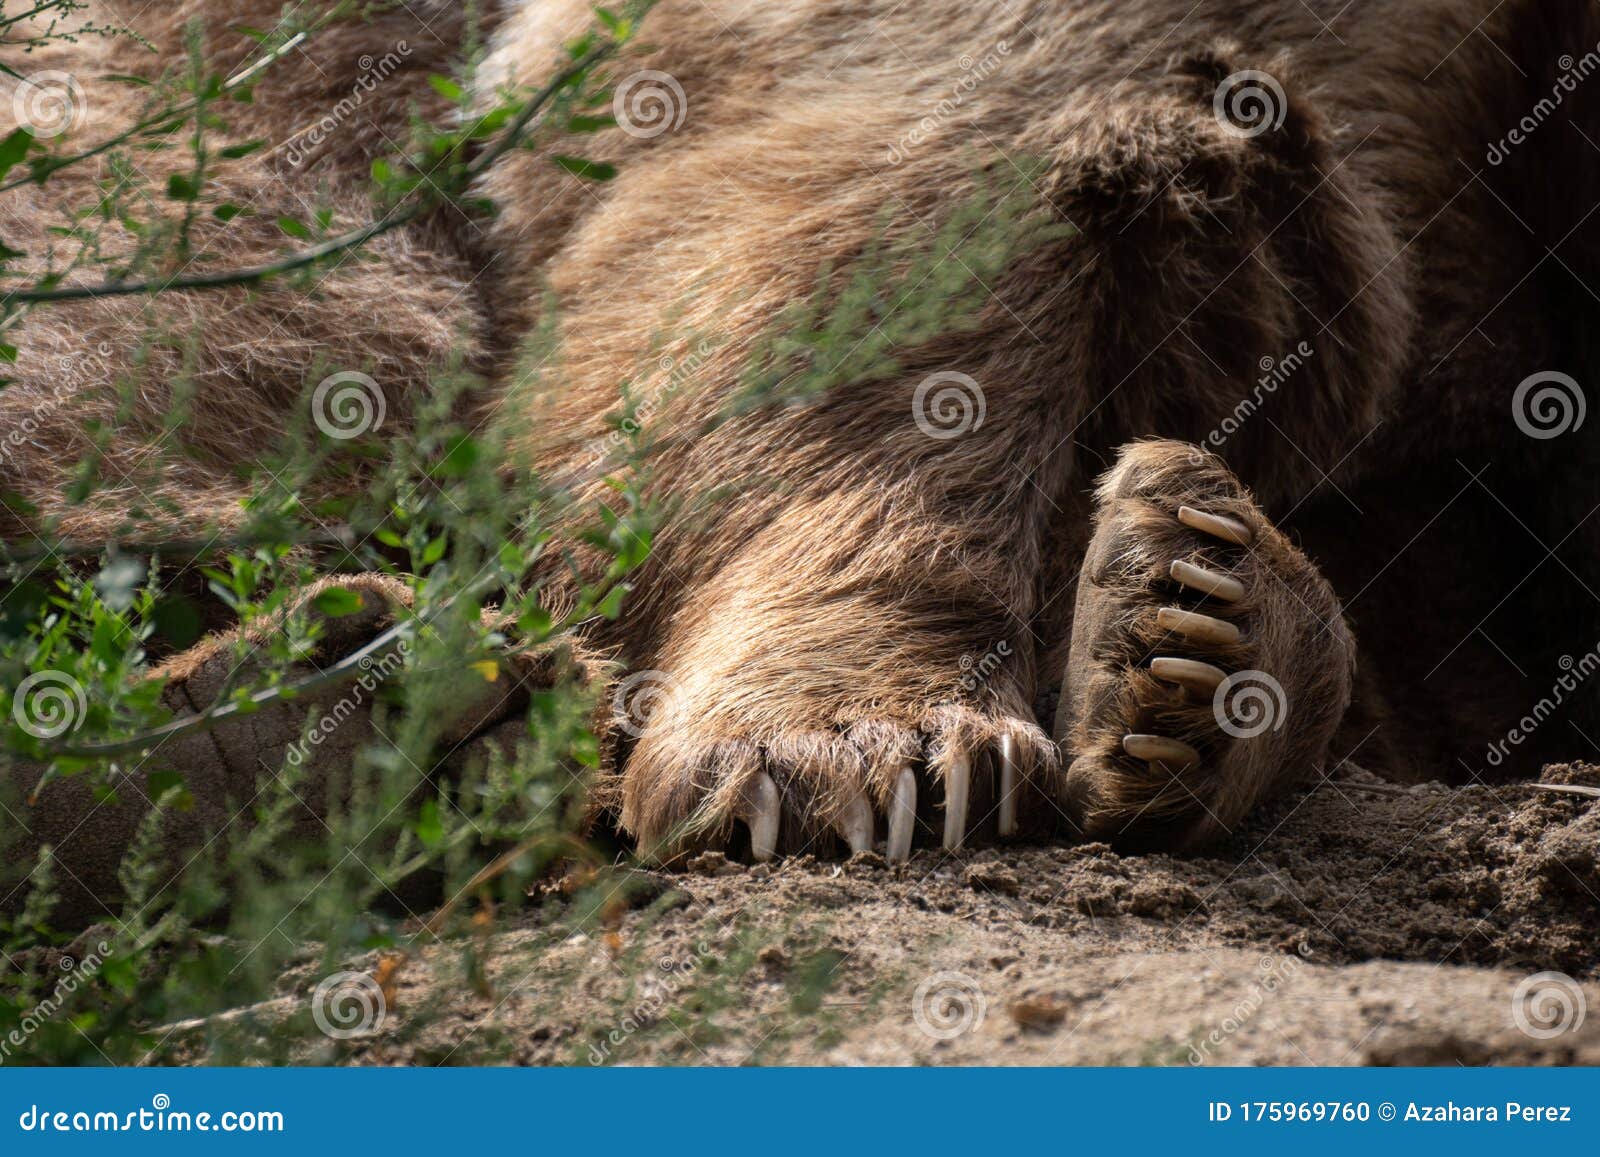 Detail of the Paws and Pads a Brown Resting Stock Photo - Image of animal, eyes: 175969760